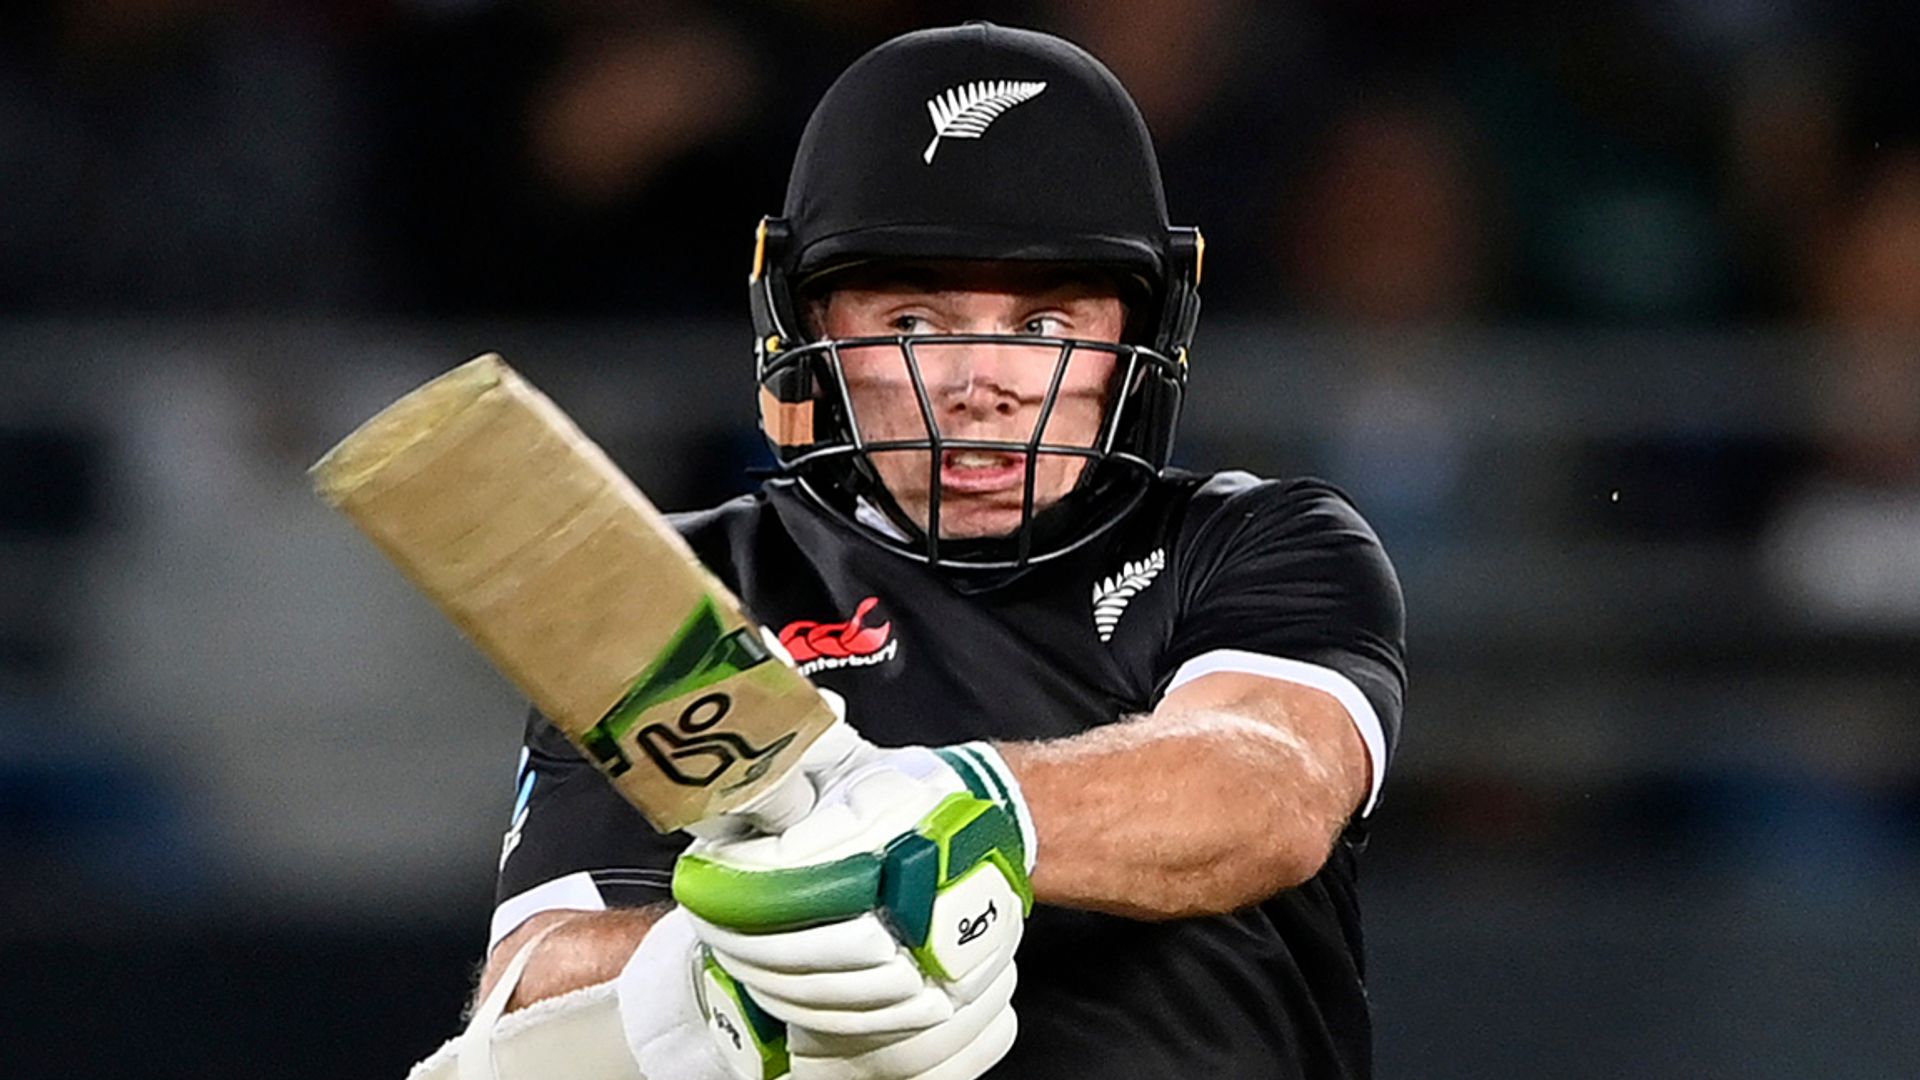 Latham leads NZ to victory over India with career-best 145